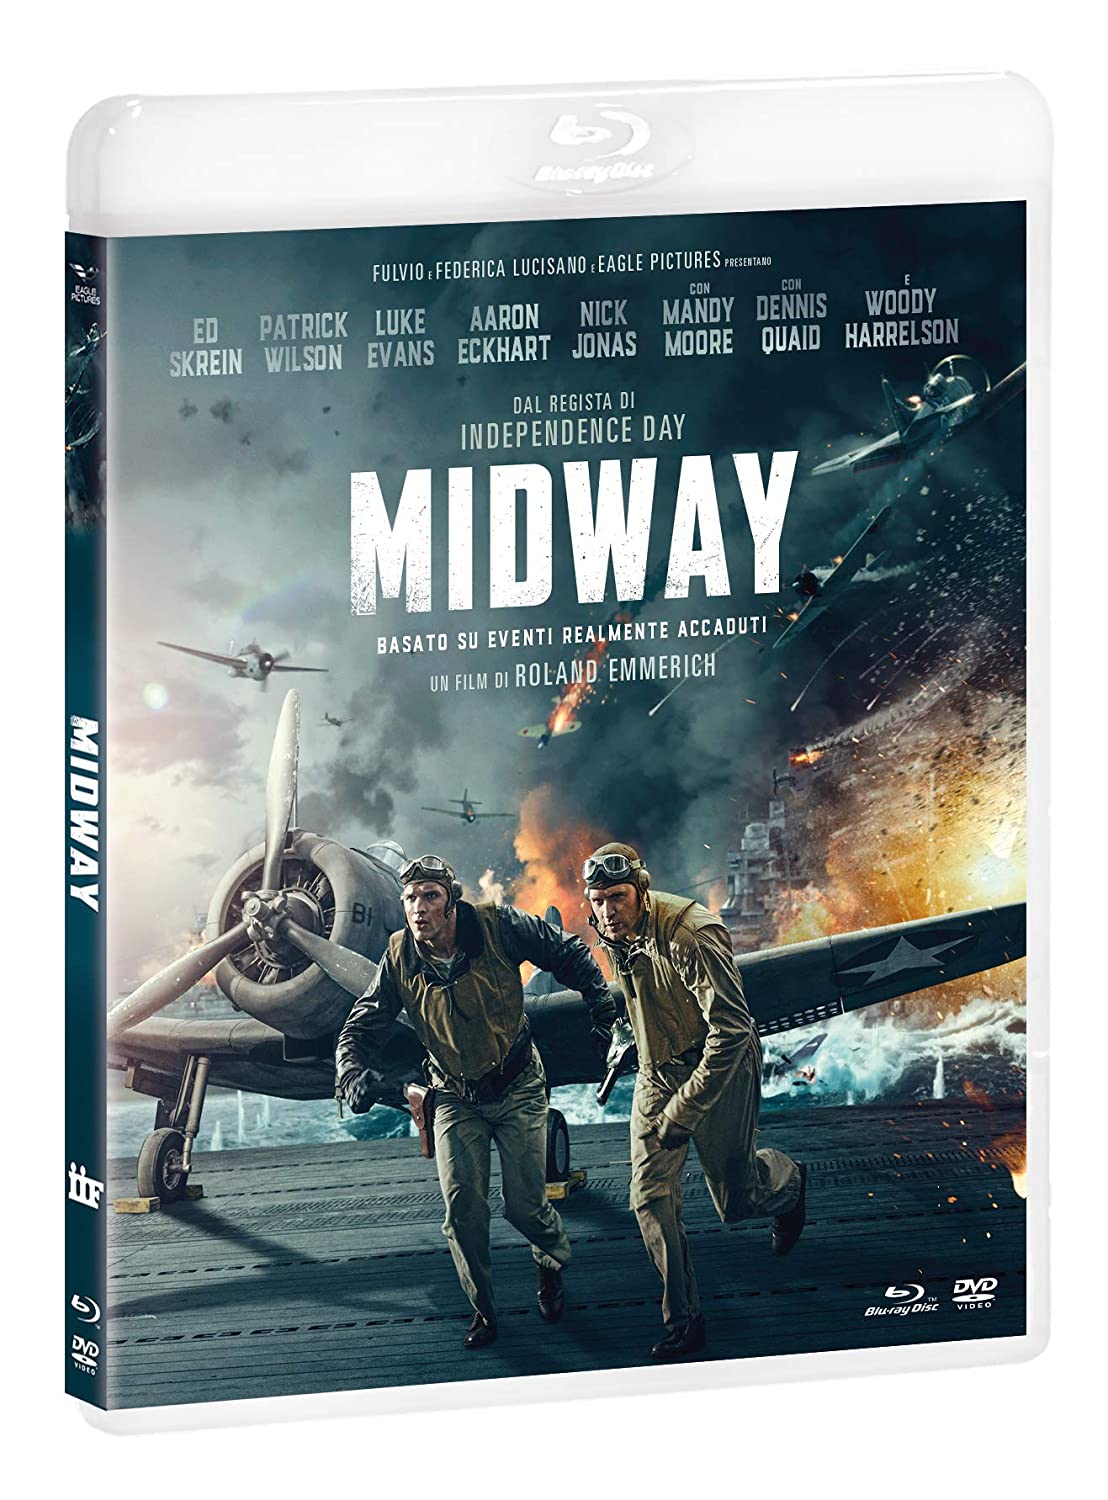 MIDWAY COMBO (BD + DVD)